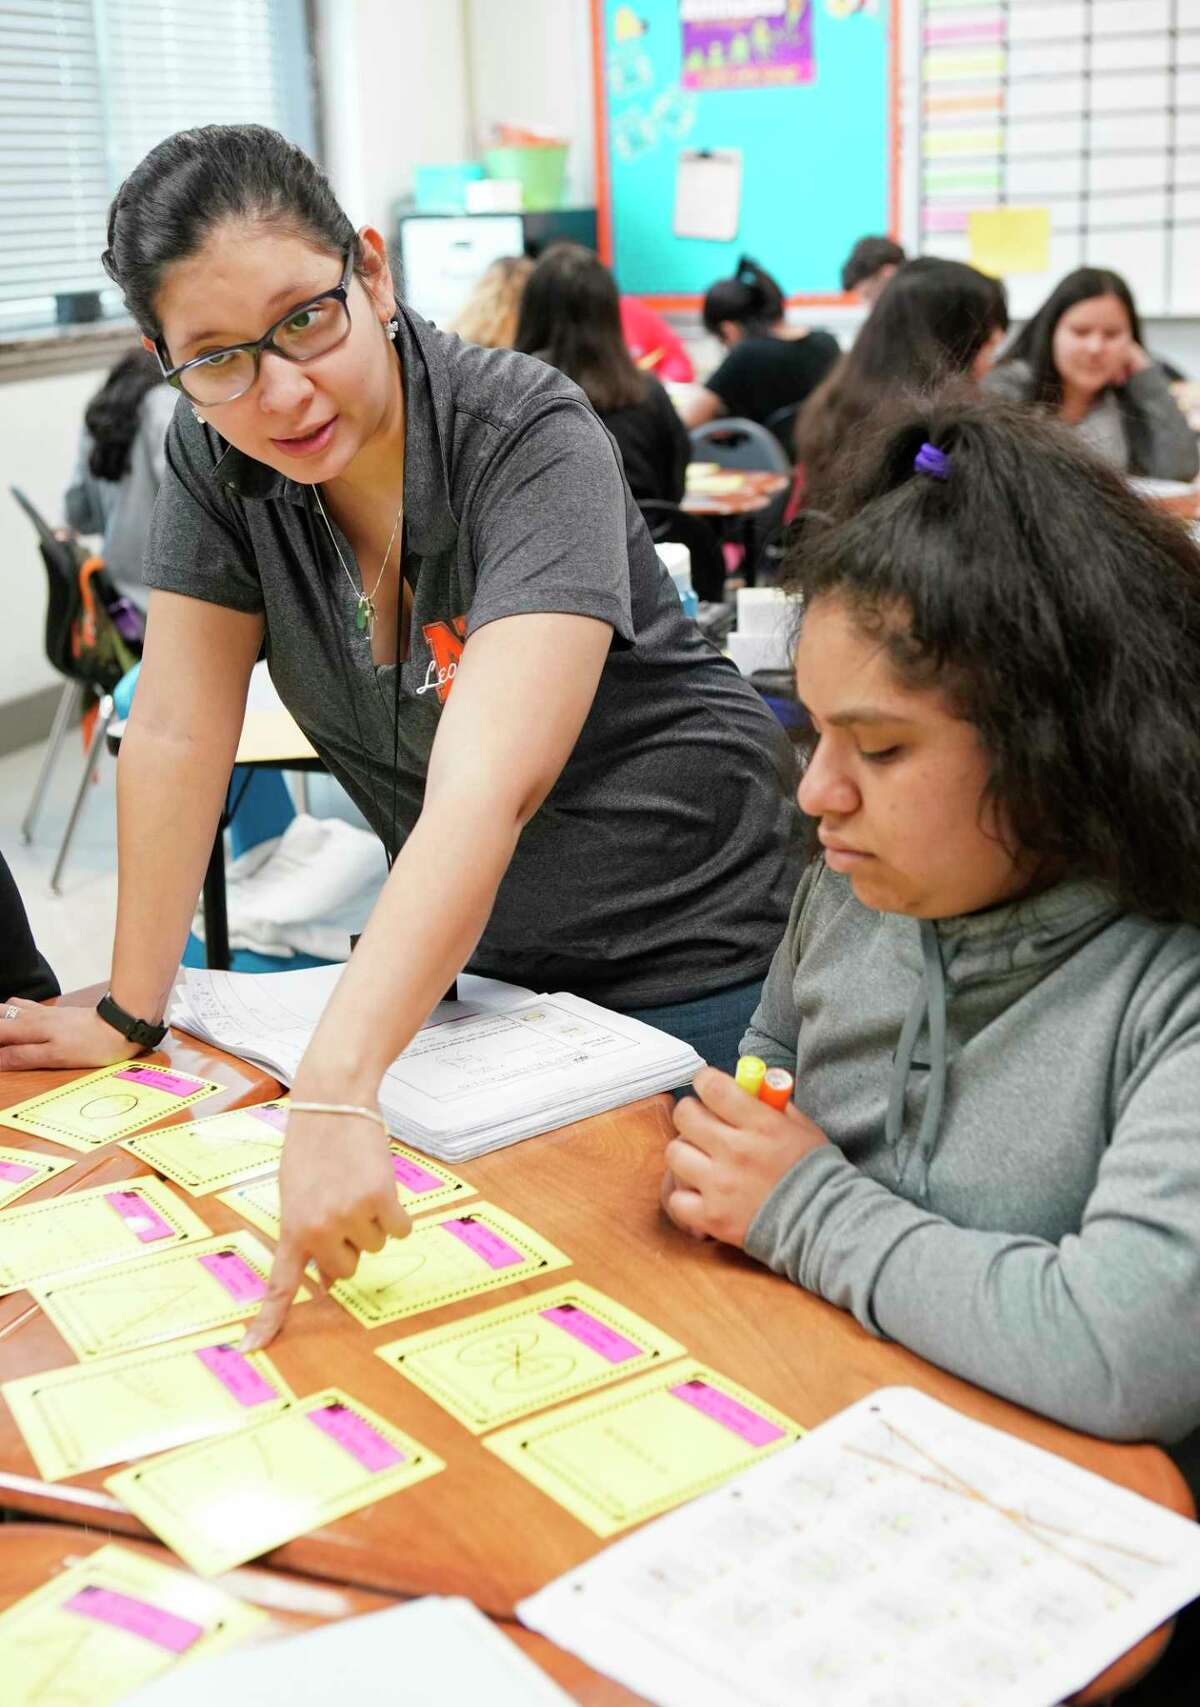 Navarro Middle School teacher Ana Steen, pictured in 2019, works with eighth-grader Jazzmin Gutierrez and others at her table during an algebra class at the Houston ISD campus. Navarro is one of 13 neighborhood middle schools that does not have a magnet program, making it harder to attract students who would bring more money to the east side campus.